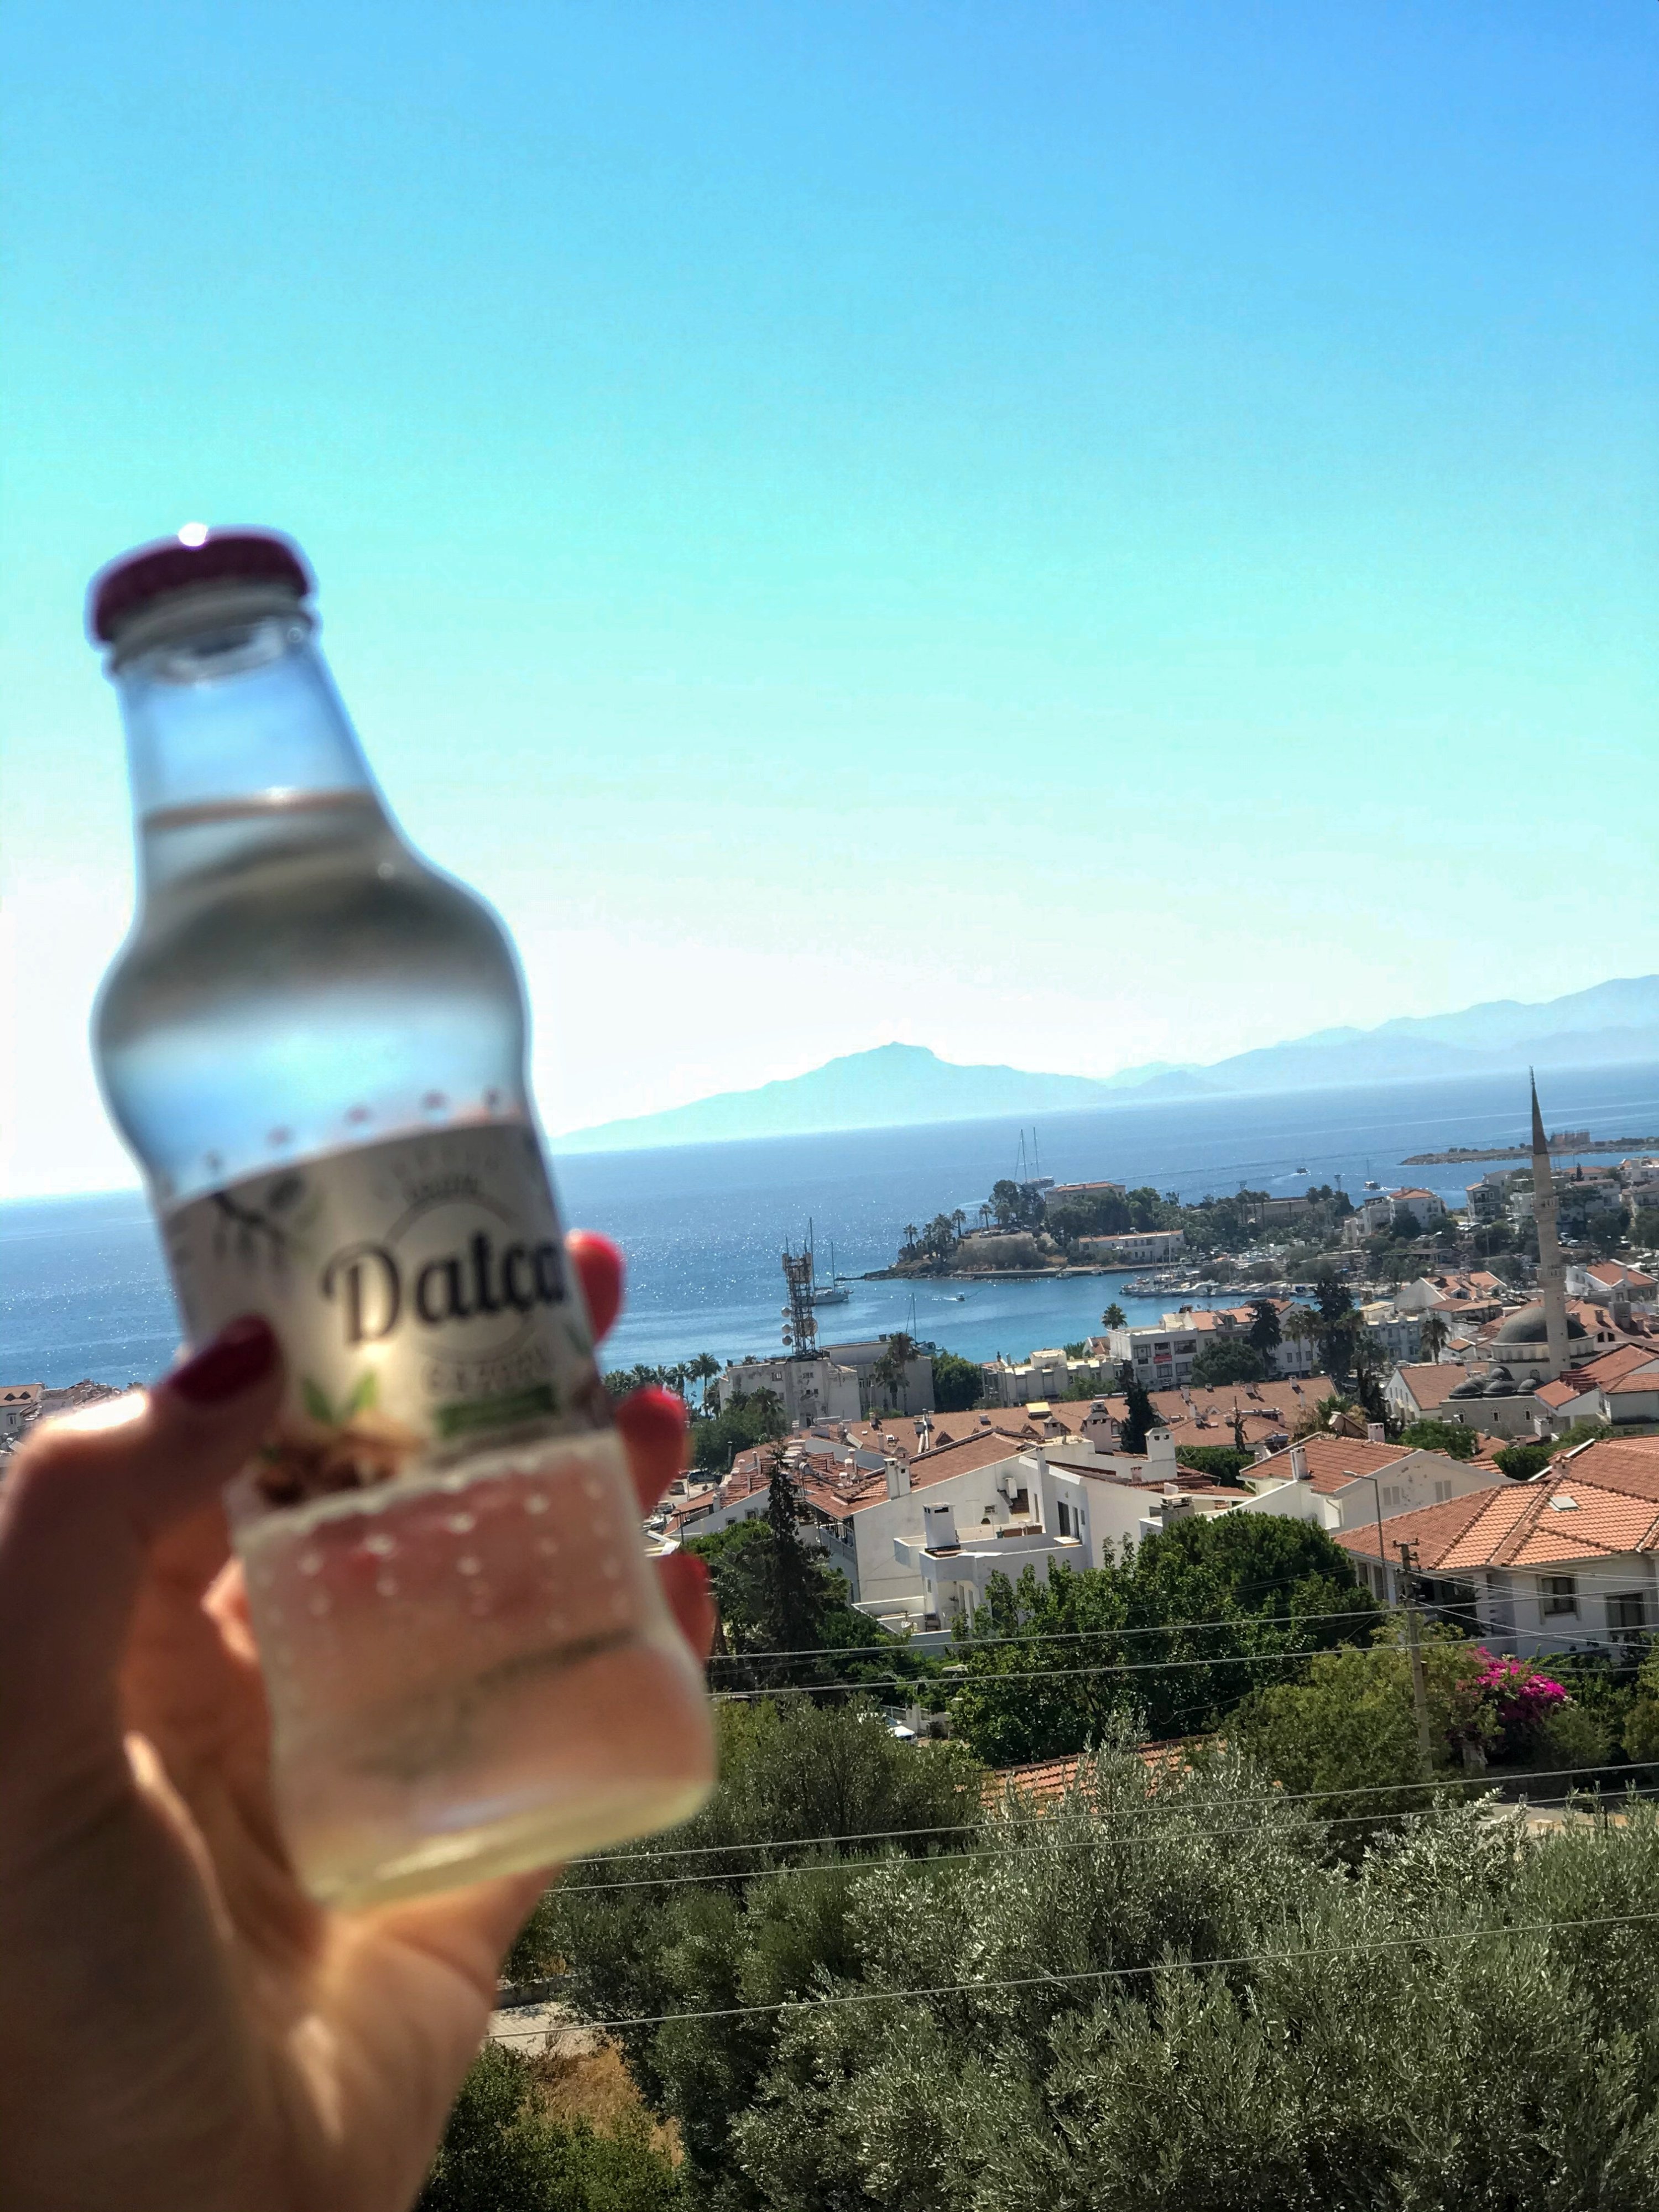 While you're in Old Datça, don't forget to drink traditional Datça soda. (Photo by Özge Şengelen)